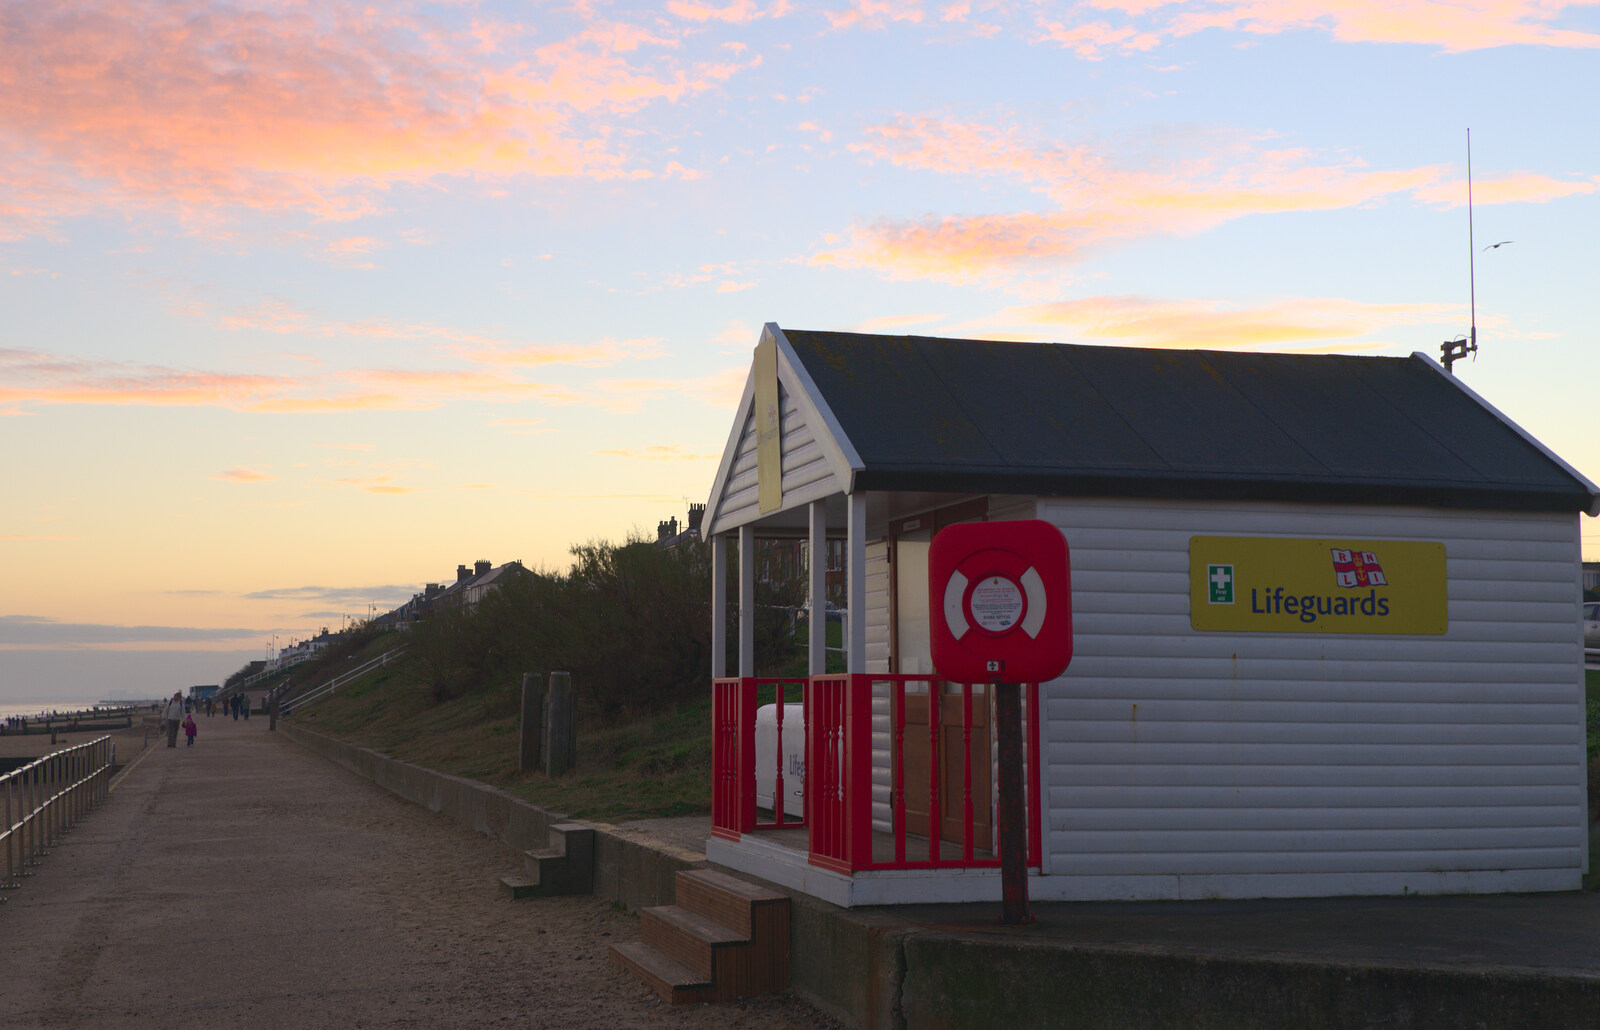 The Southwold lifeguard hut from Sunset on the Beach, Southwold, Suffolk - 30th December 2014